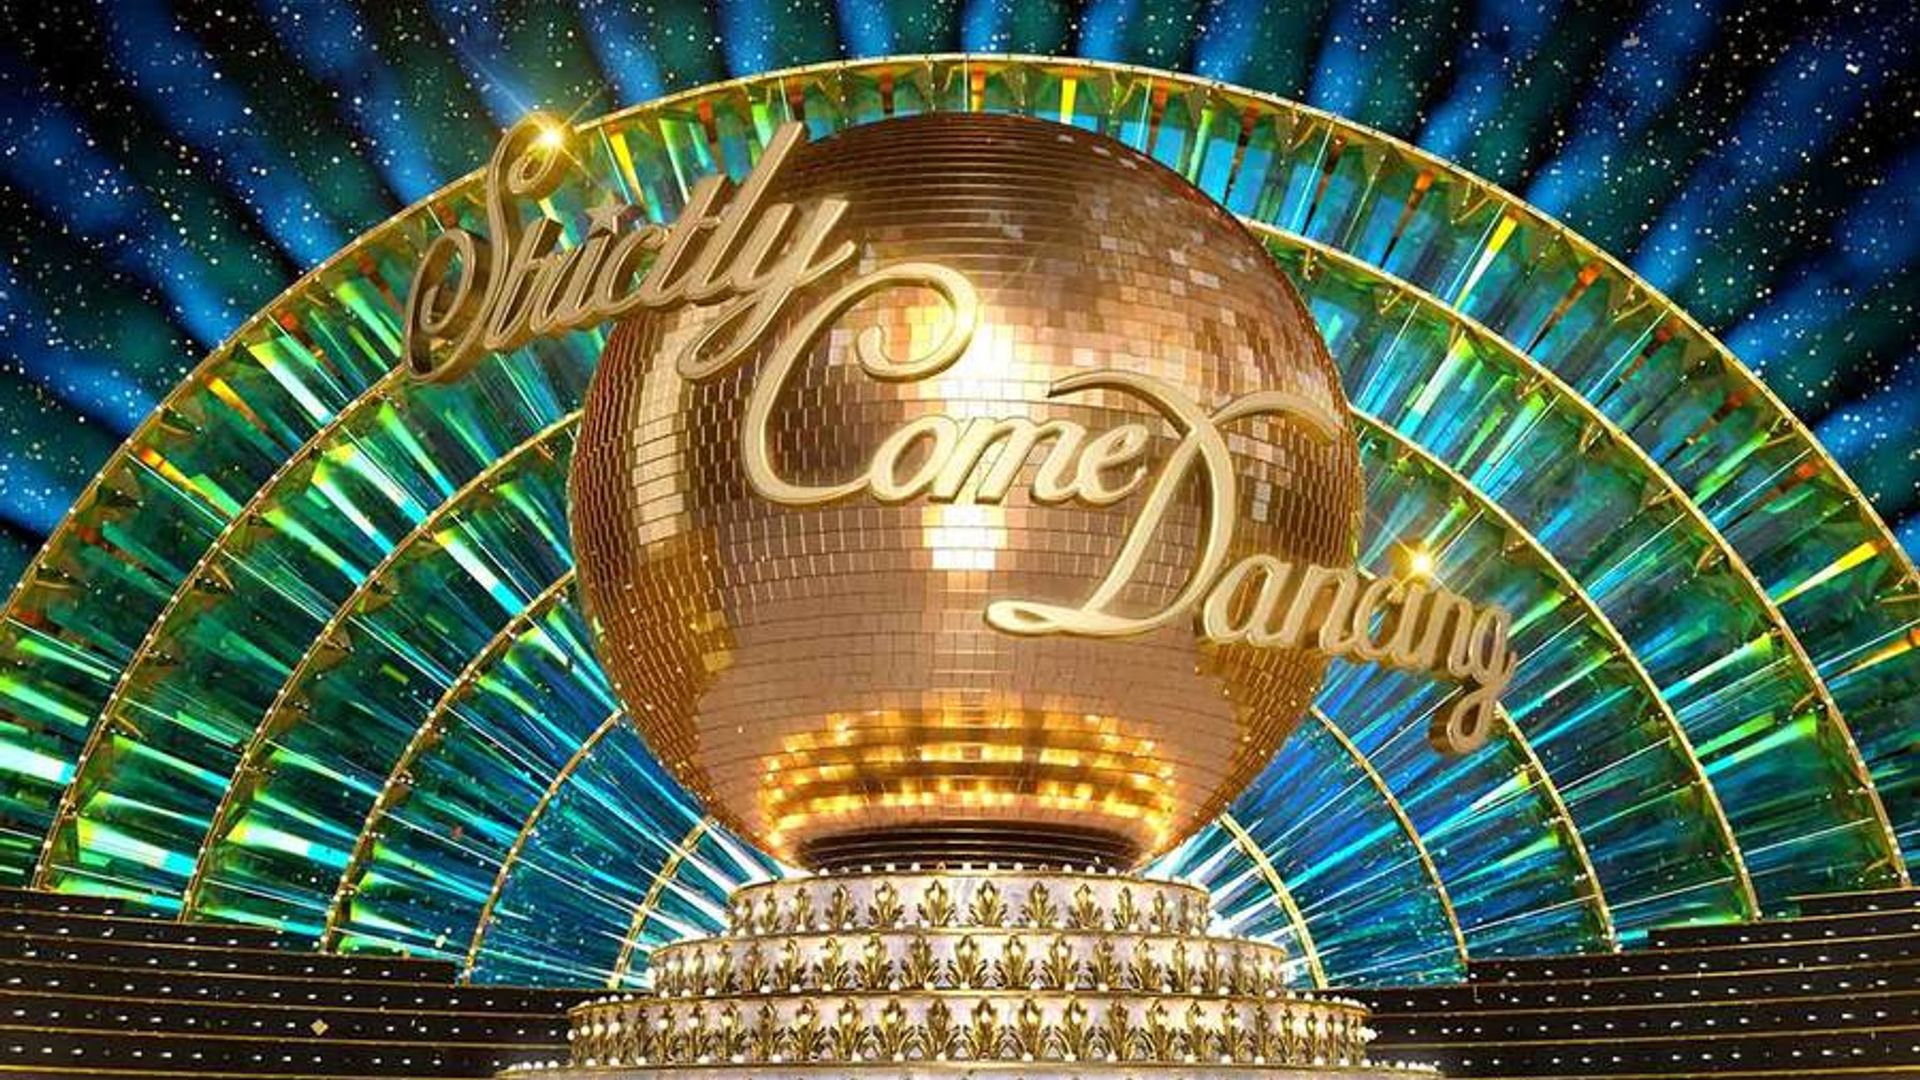 Strictly Come Dancing celebrities in 2019: See who's in talks